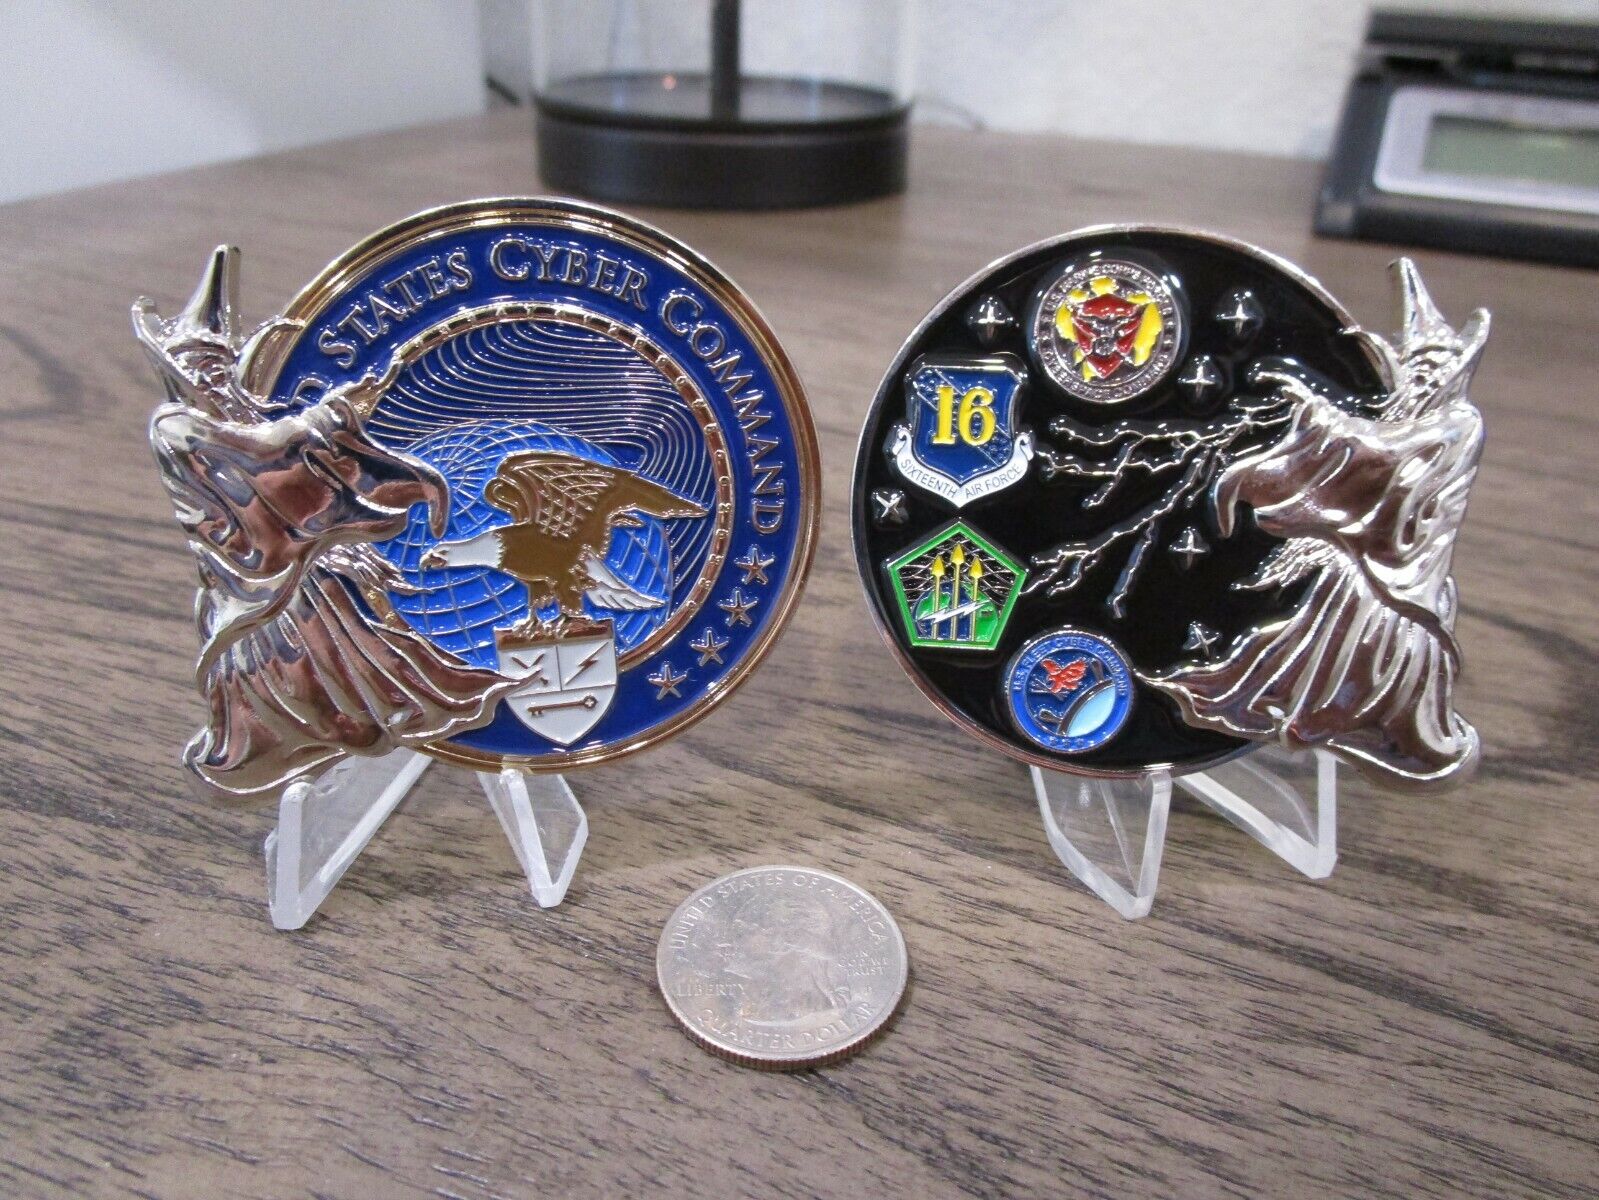 US Cyber Command CYBERCOM USN USAF Army  NSA Wizard Challenge Coin